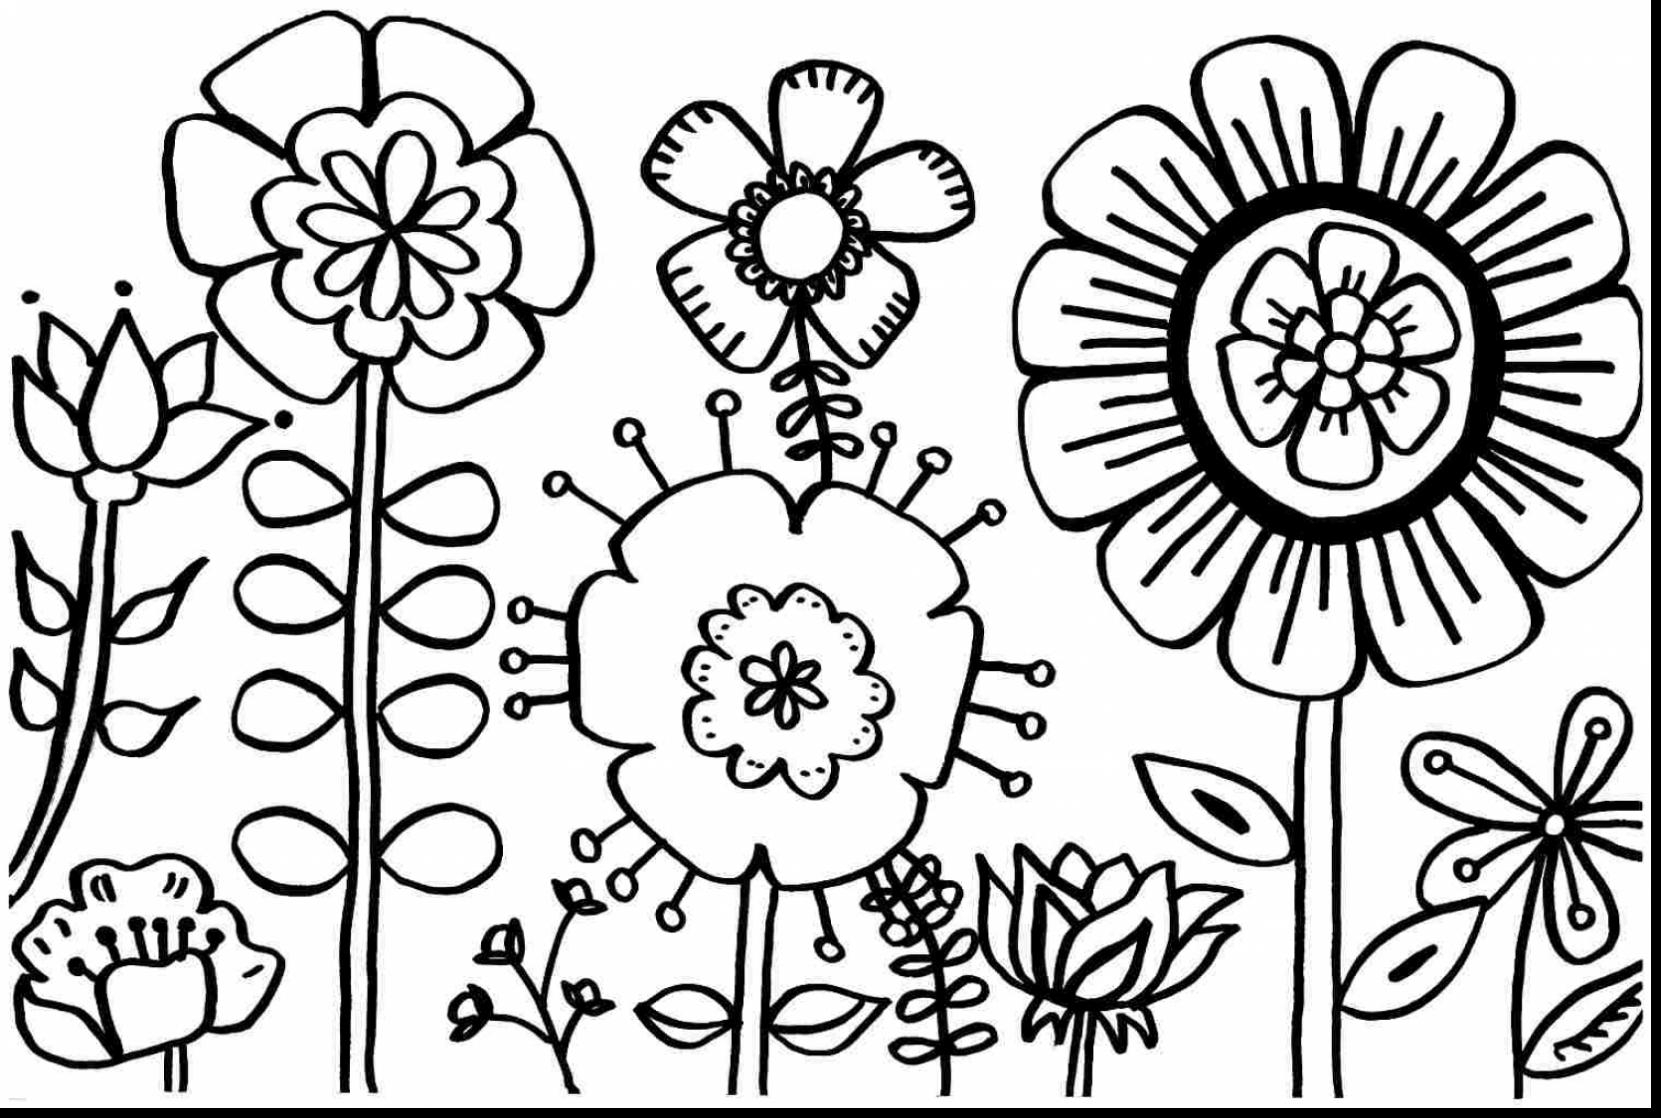 Spring Coloring Pages Springtime Coloring Pages Amazing Top 35 Free Printable Spring